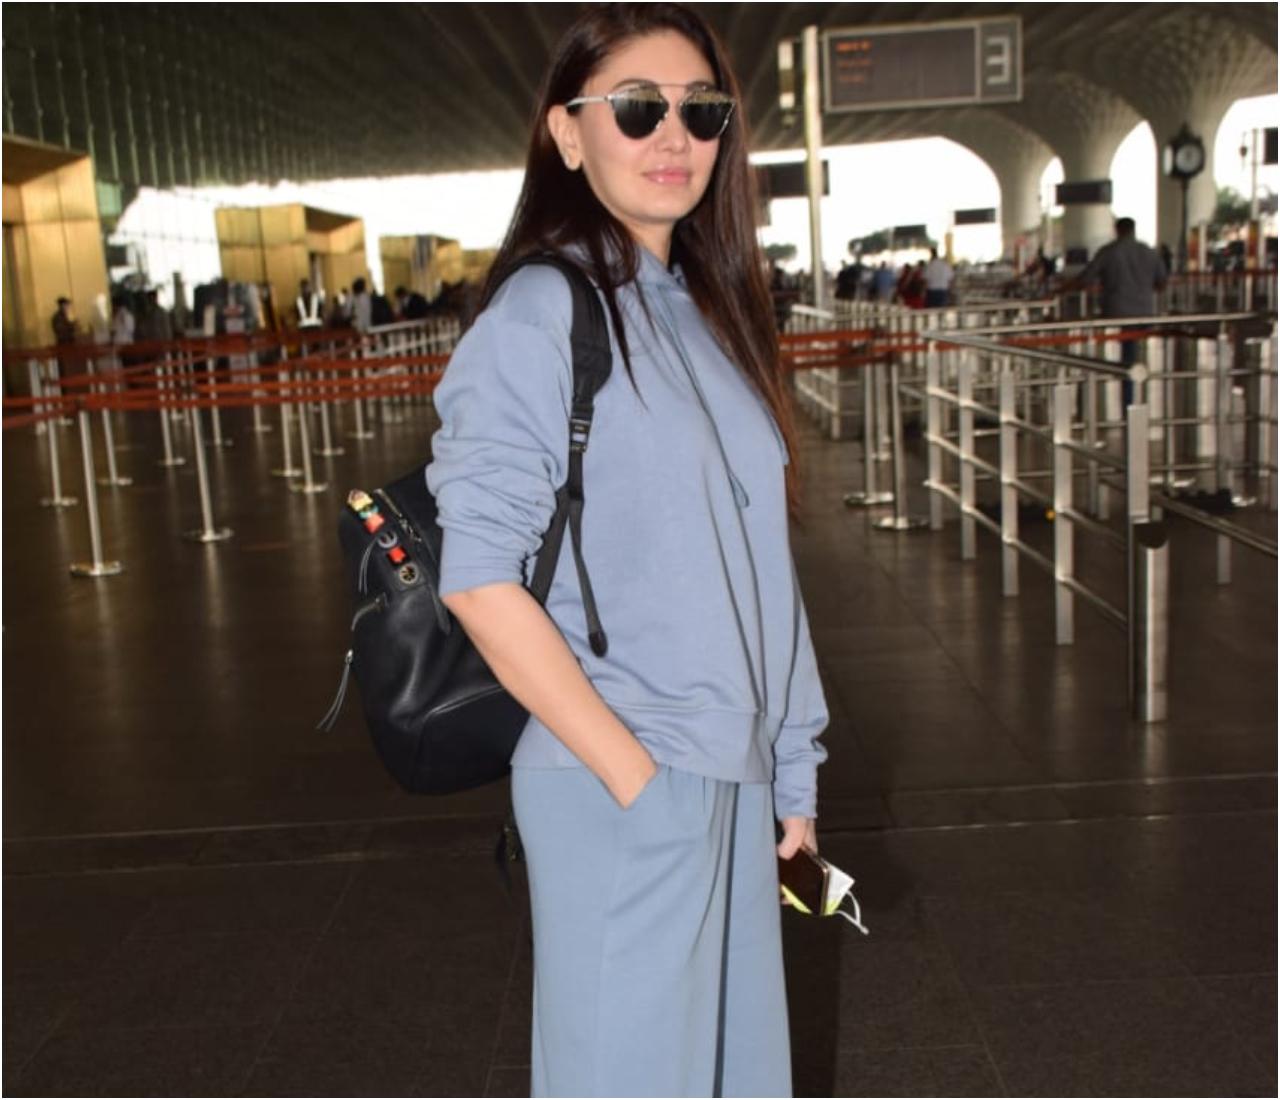 Bigg Boss 13 contestant Shefali Jariwala was also clicked at the airport. She opted for a blue t-shirt and trousers for the outing.